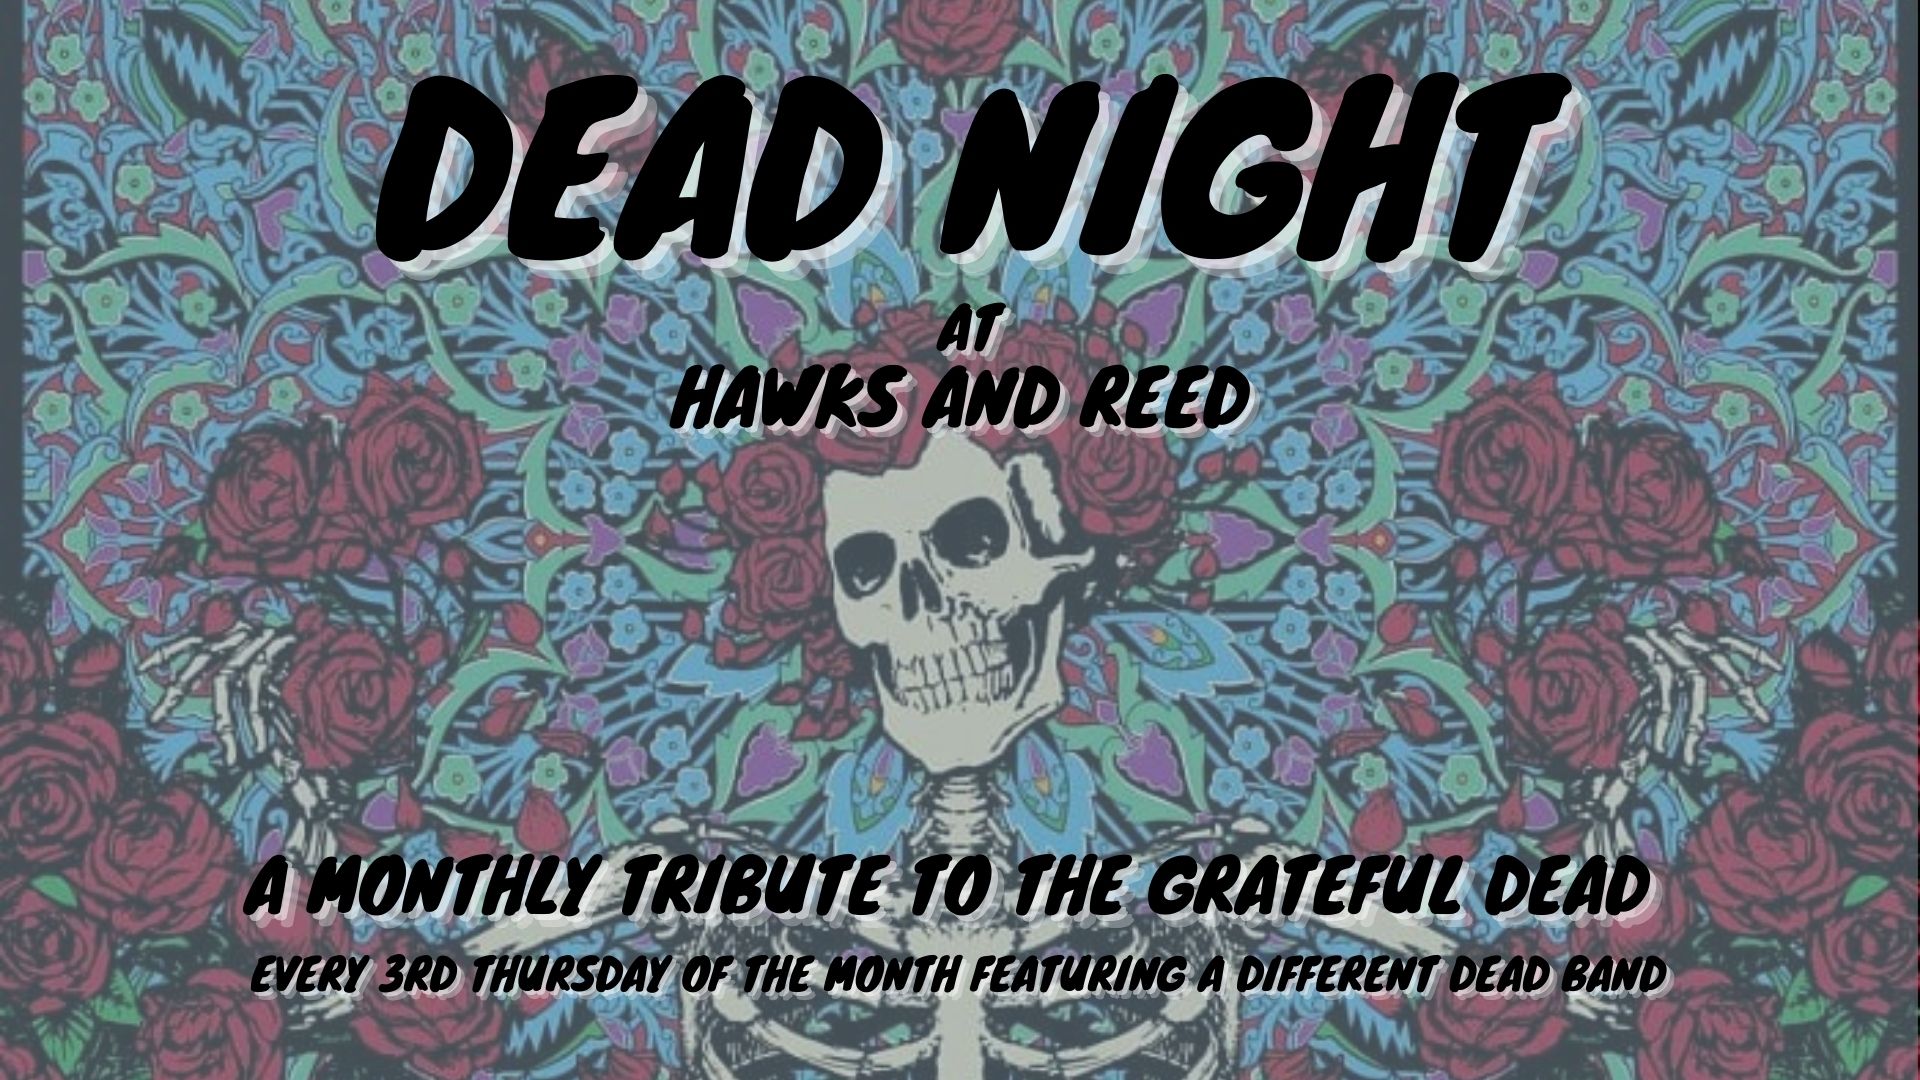 DEAD NIGHT AT HAWKS AND REED – FT. SHRED IS DEAD